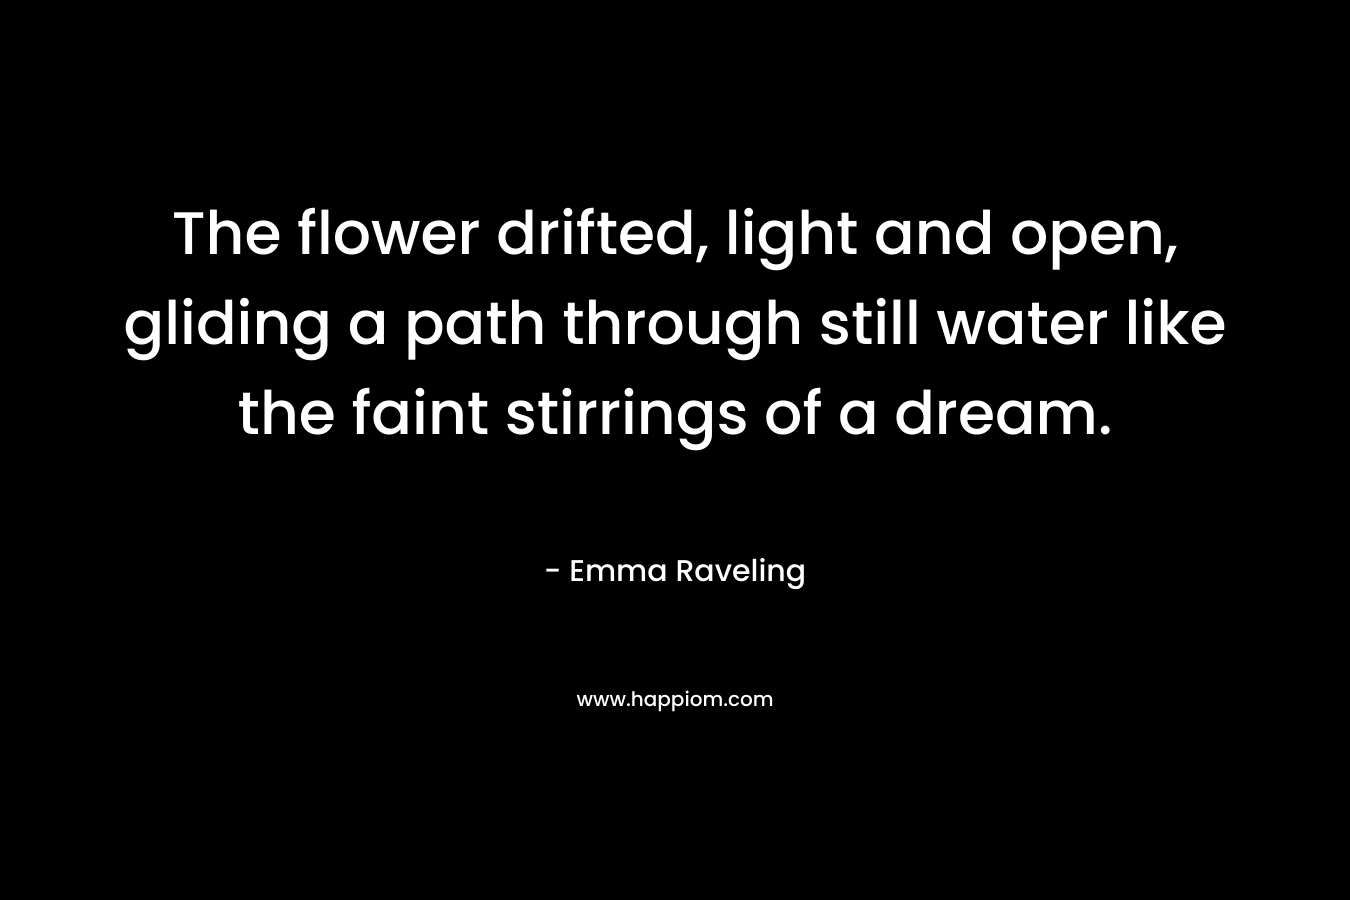 The flower drifted, light and open, gliding a path through still water like the faint stirrings of a dream. – Emma Raveling